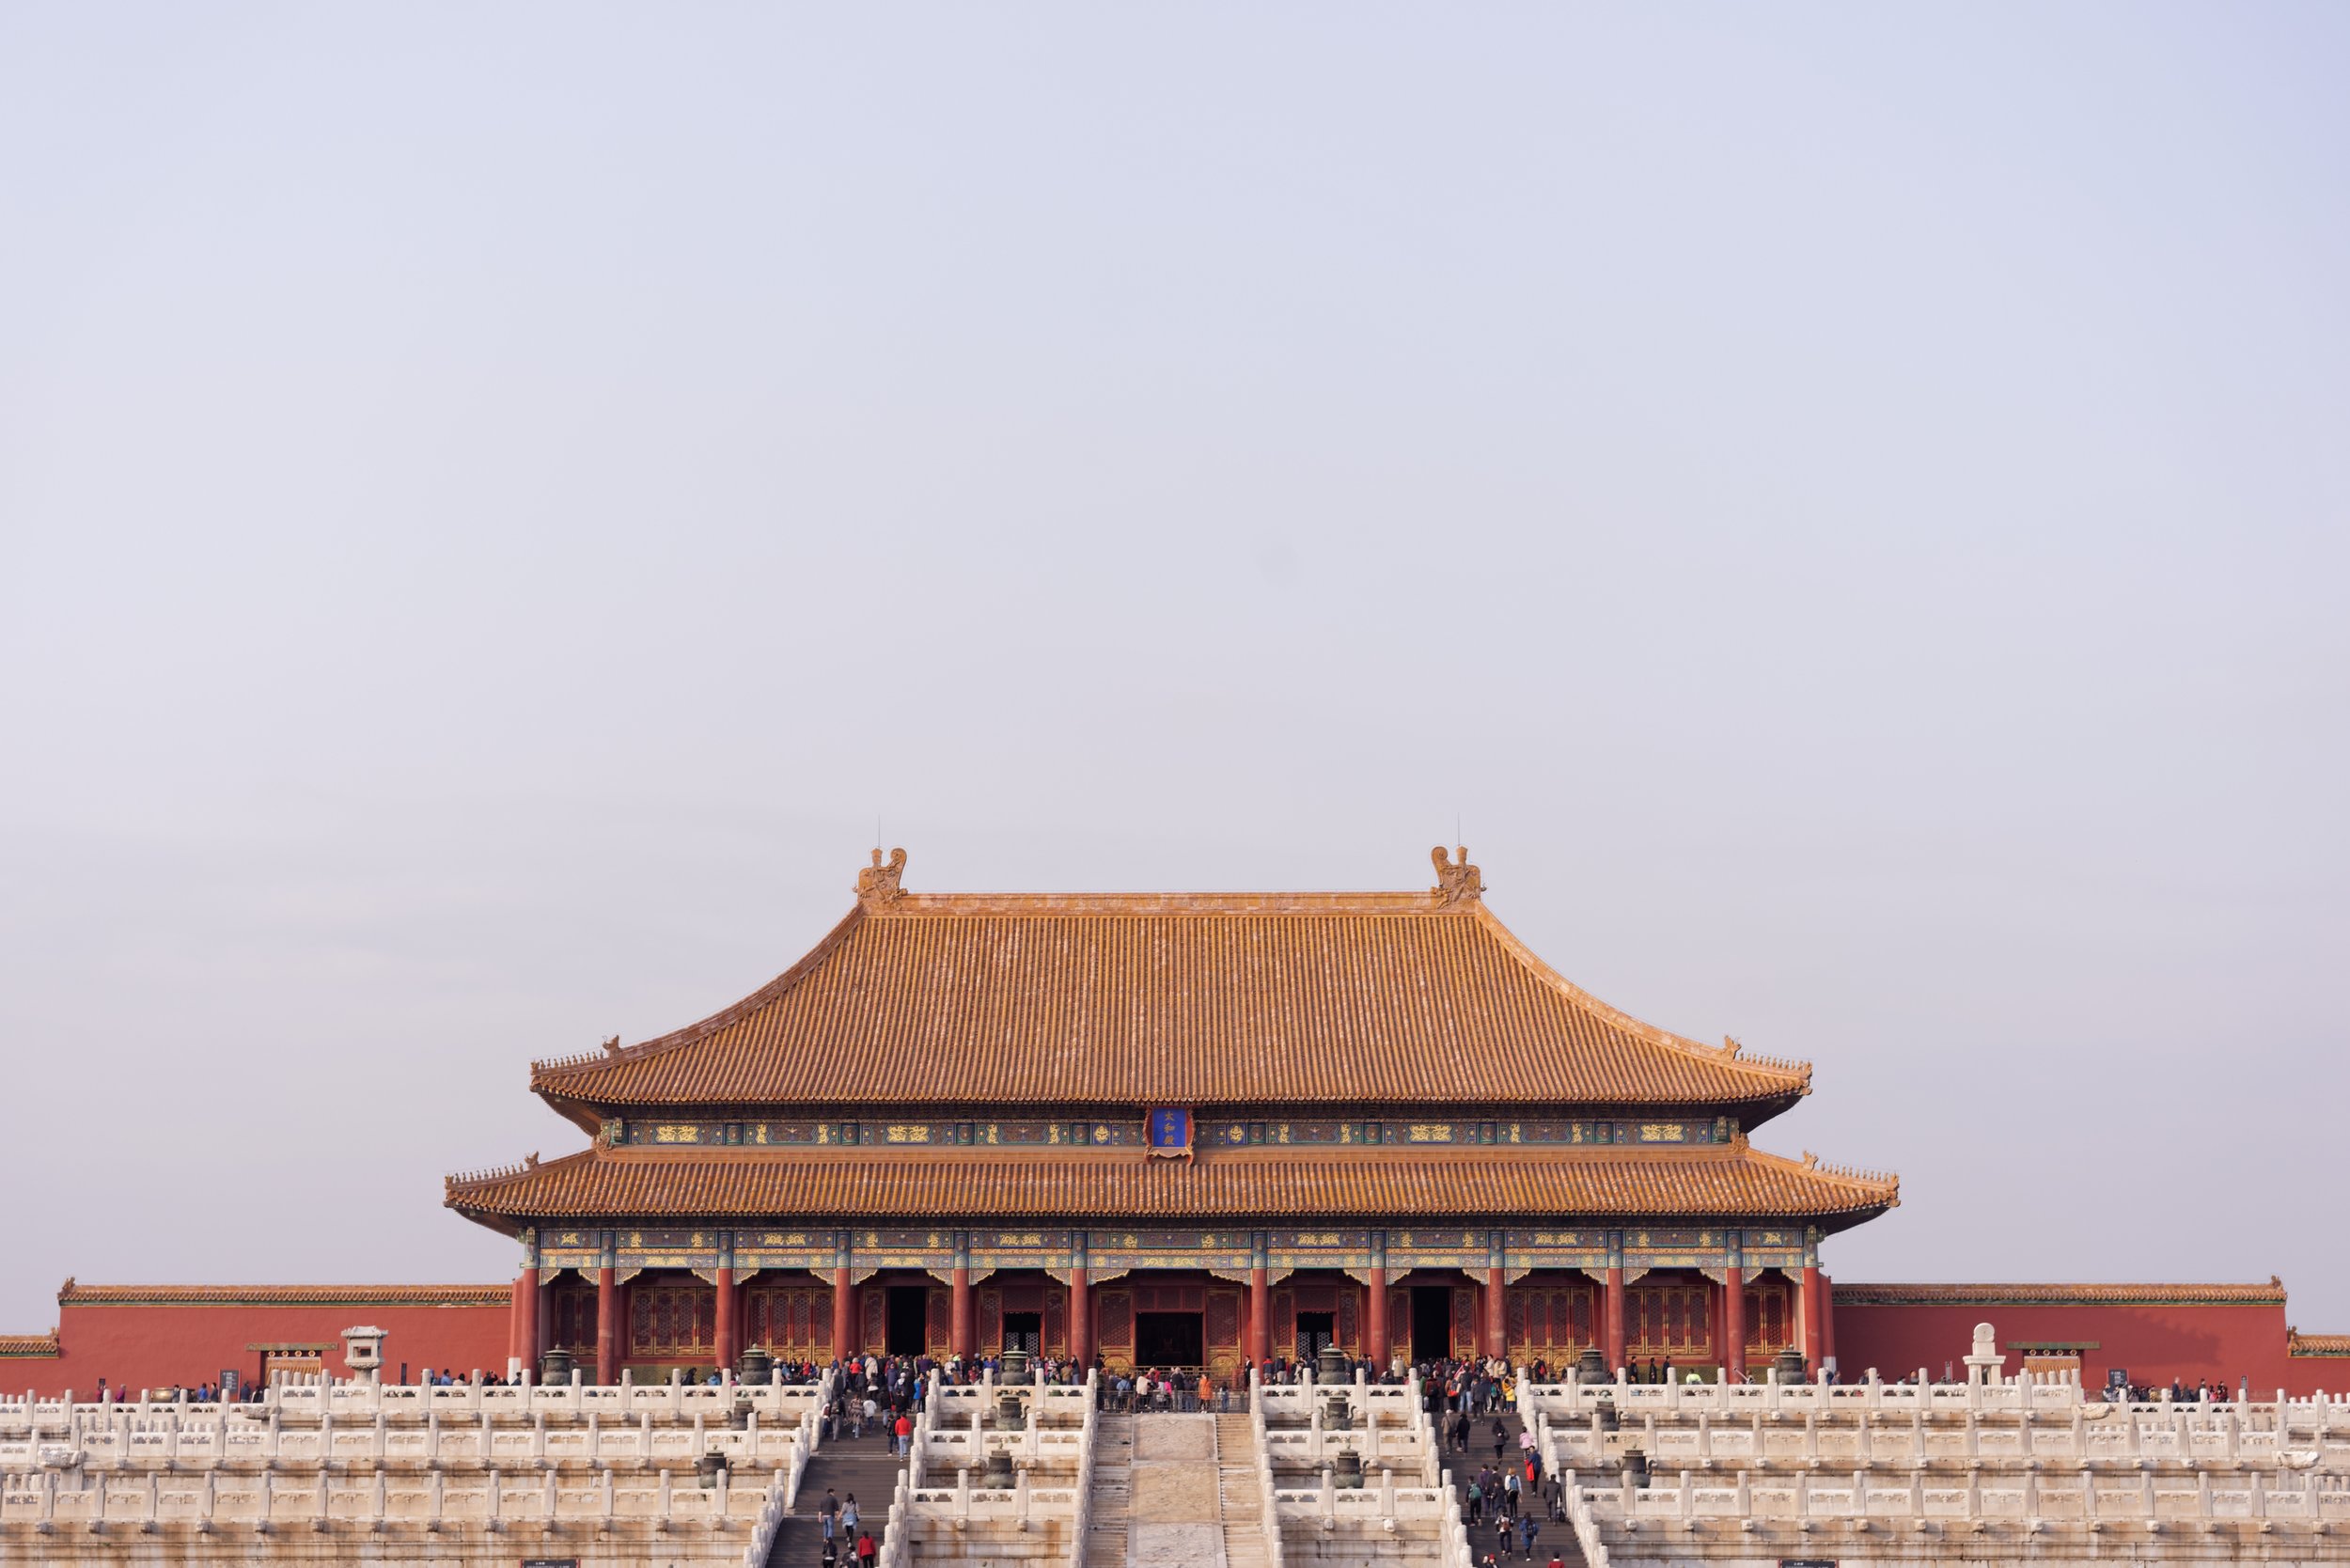 Located in Beijing, the Forbidden City also known as the Imperial Palace is the largest palace in the world, with its entire complex covering 183 acres, consisting of 980 buildings and 8707 rooms. The palace took 14 years to build, with constru…